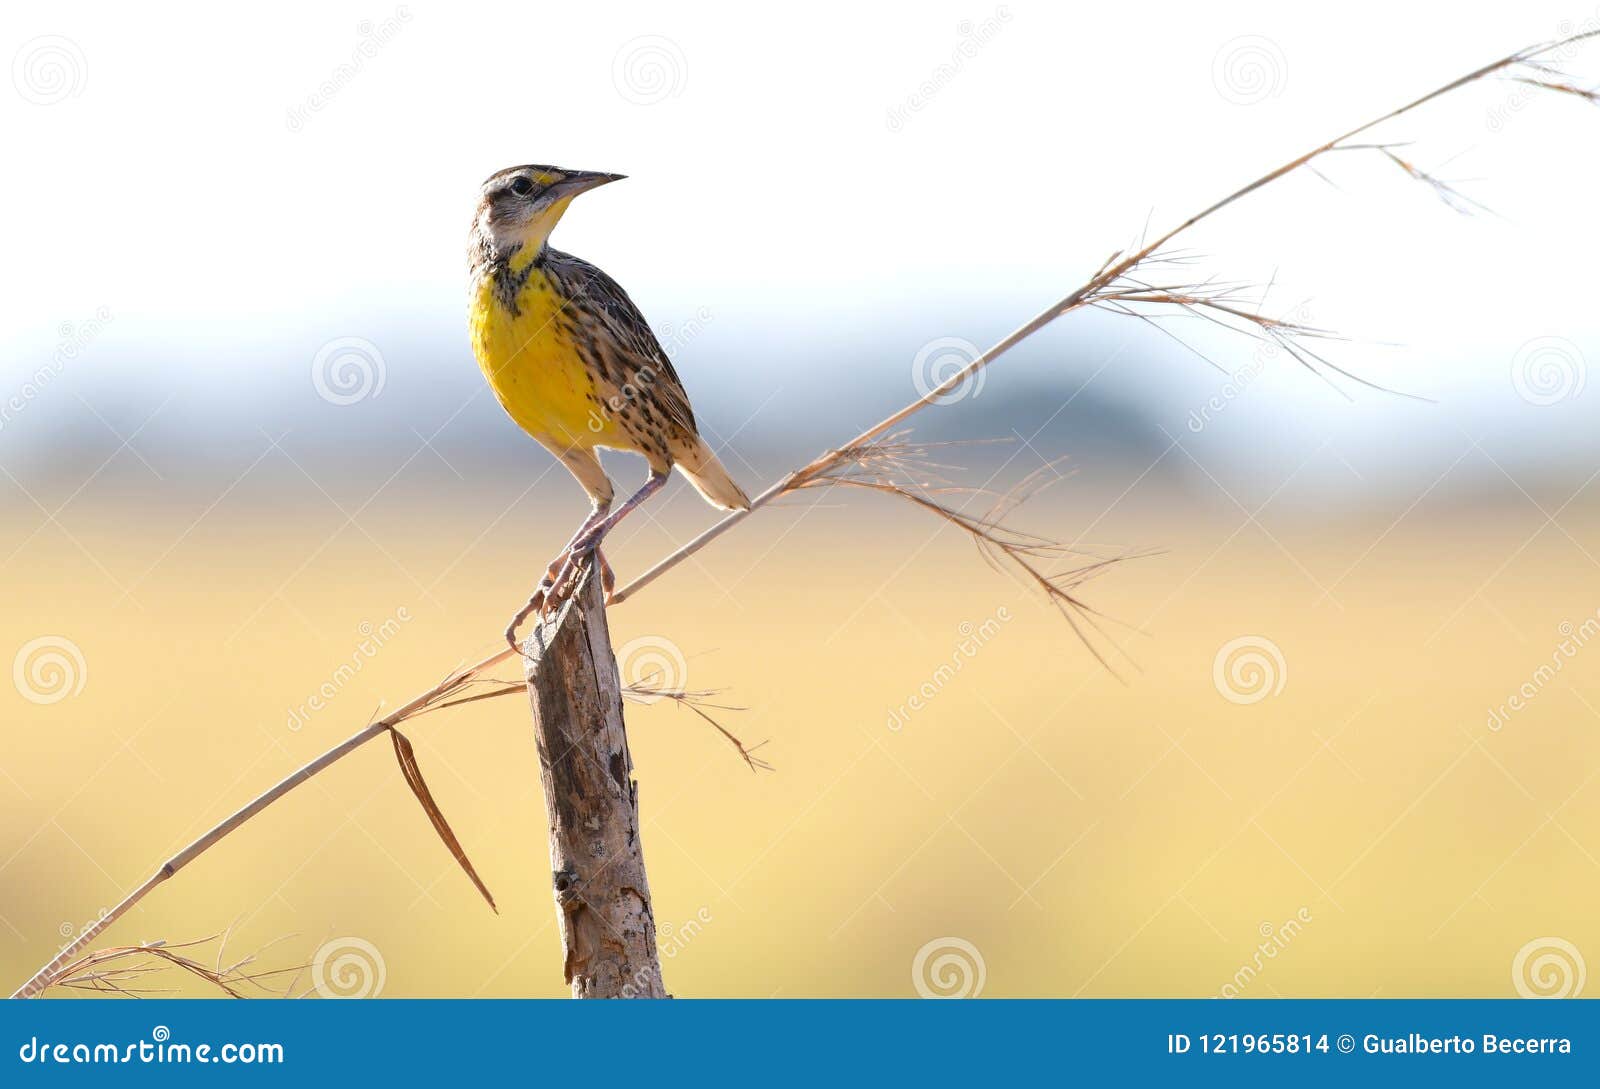 eastern meadowlark sturnella magna one of the most beautiful birds in panama